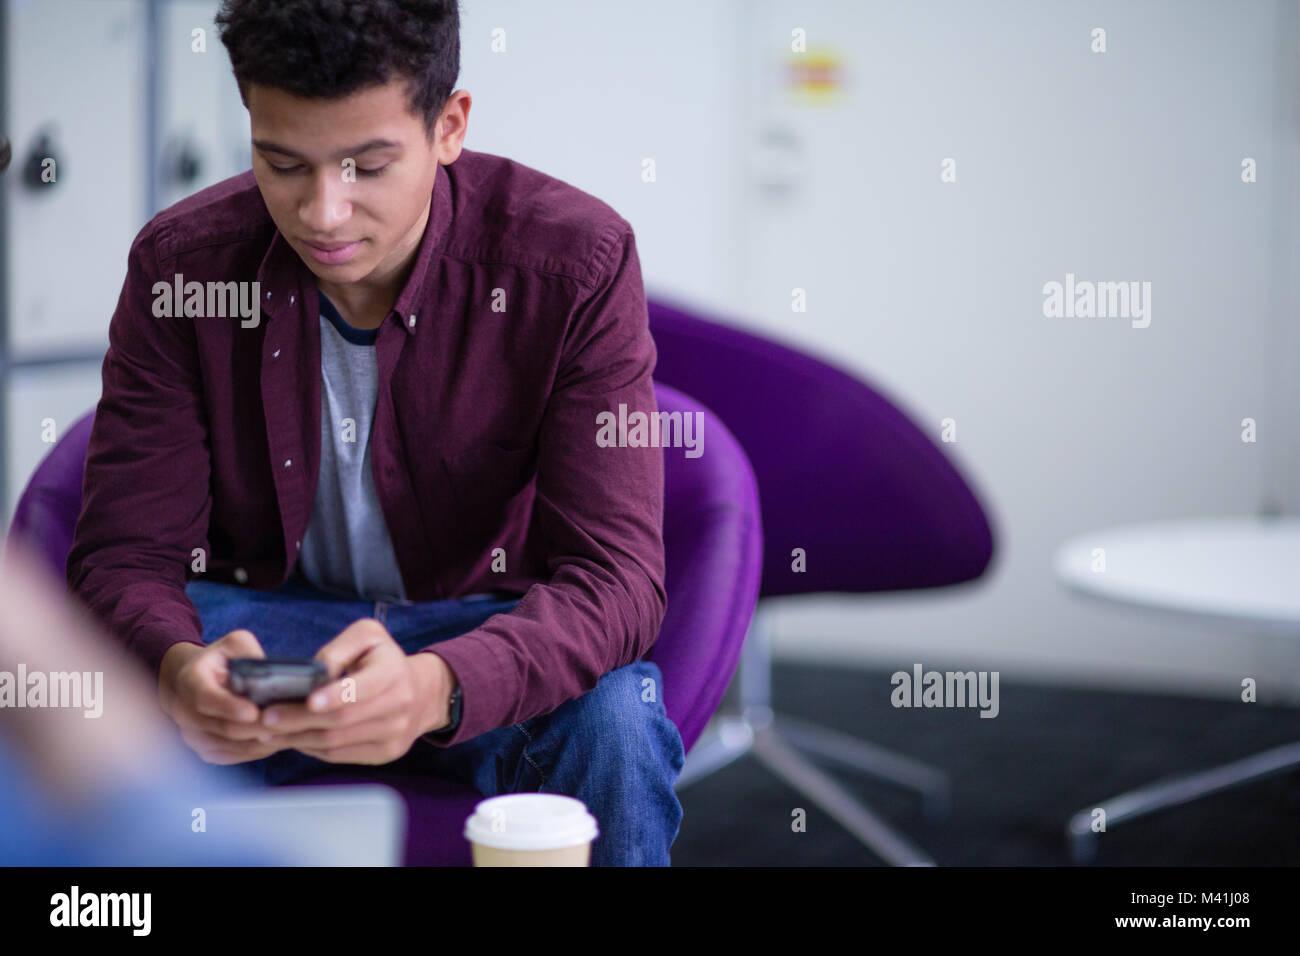 Student using smartphone at college Stock Photo